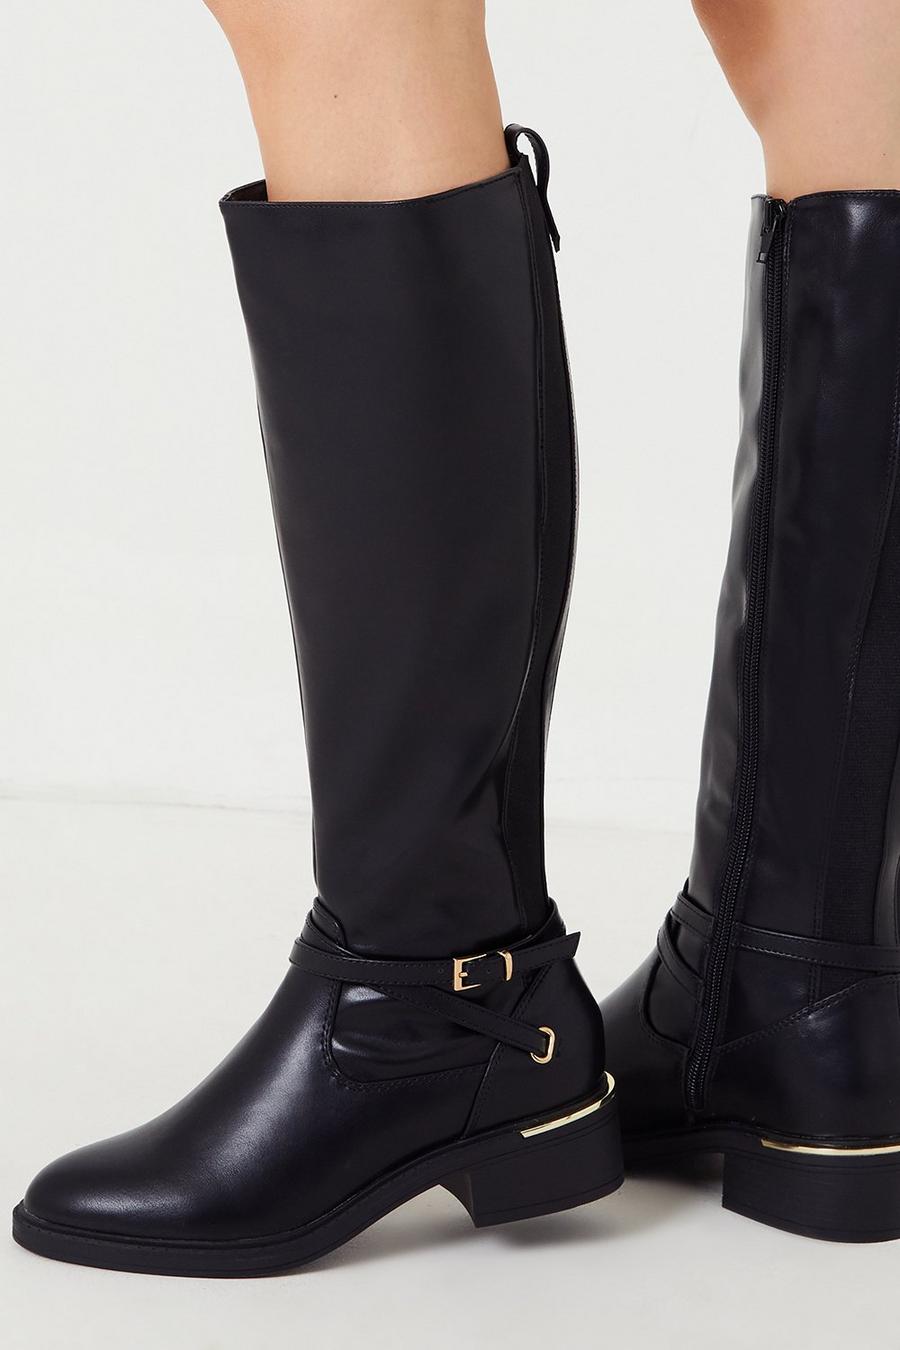 Hana Ankle Strap Detail Knee High Boots